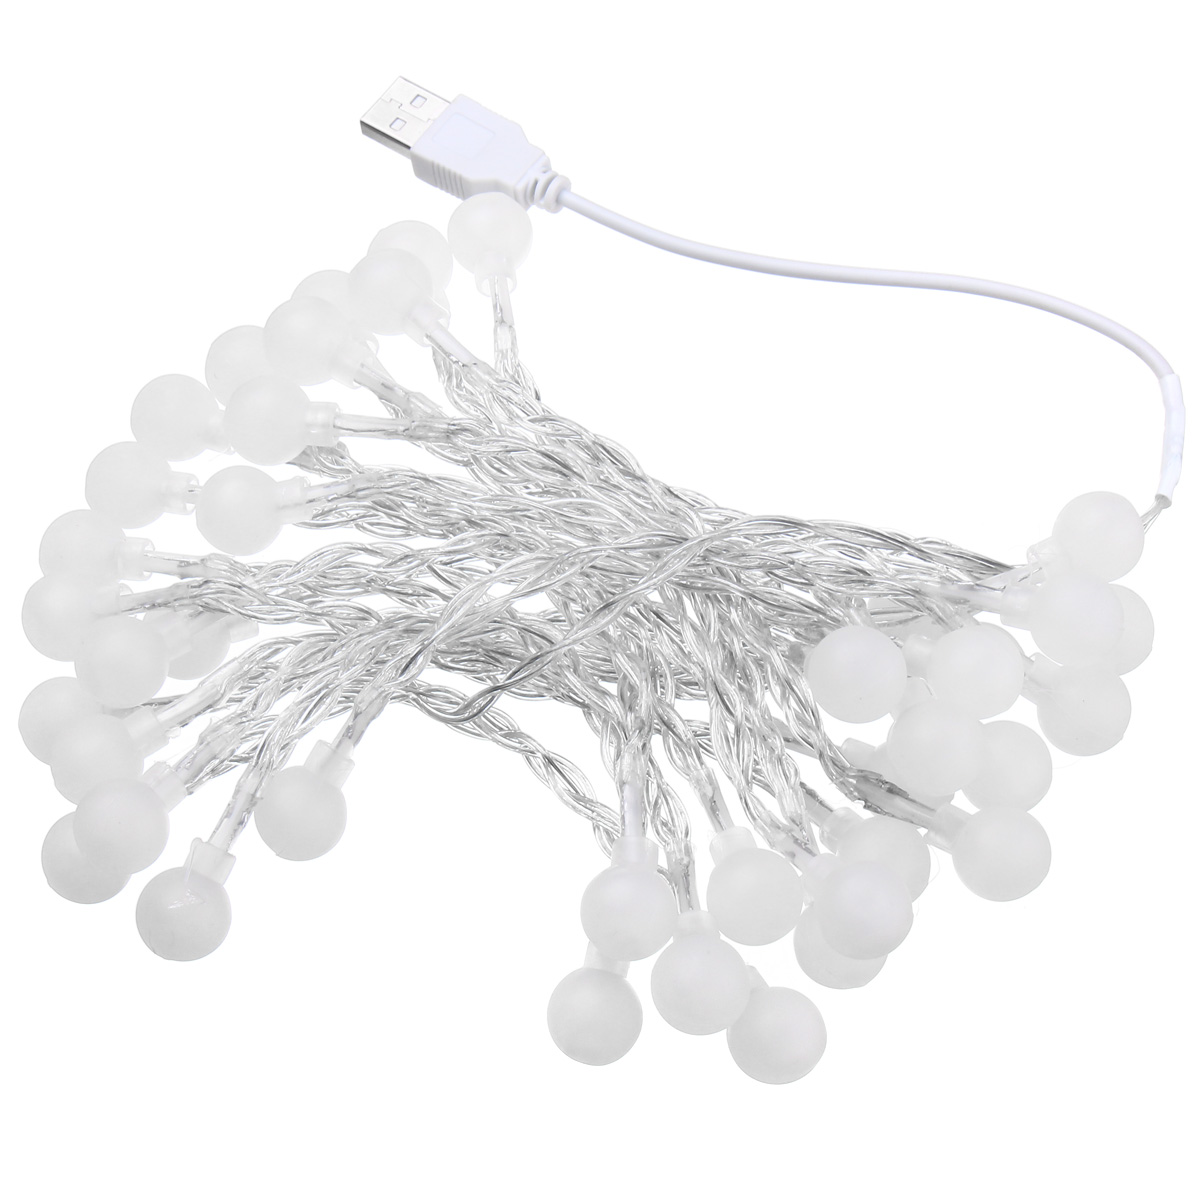 USB-Powered-42M-40LEDs-Ball-Shaped-Waterproof-Fairy-String-Light-For-Christmas-1191407-1